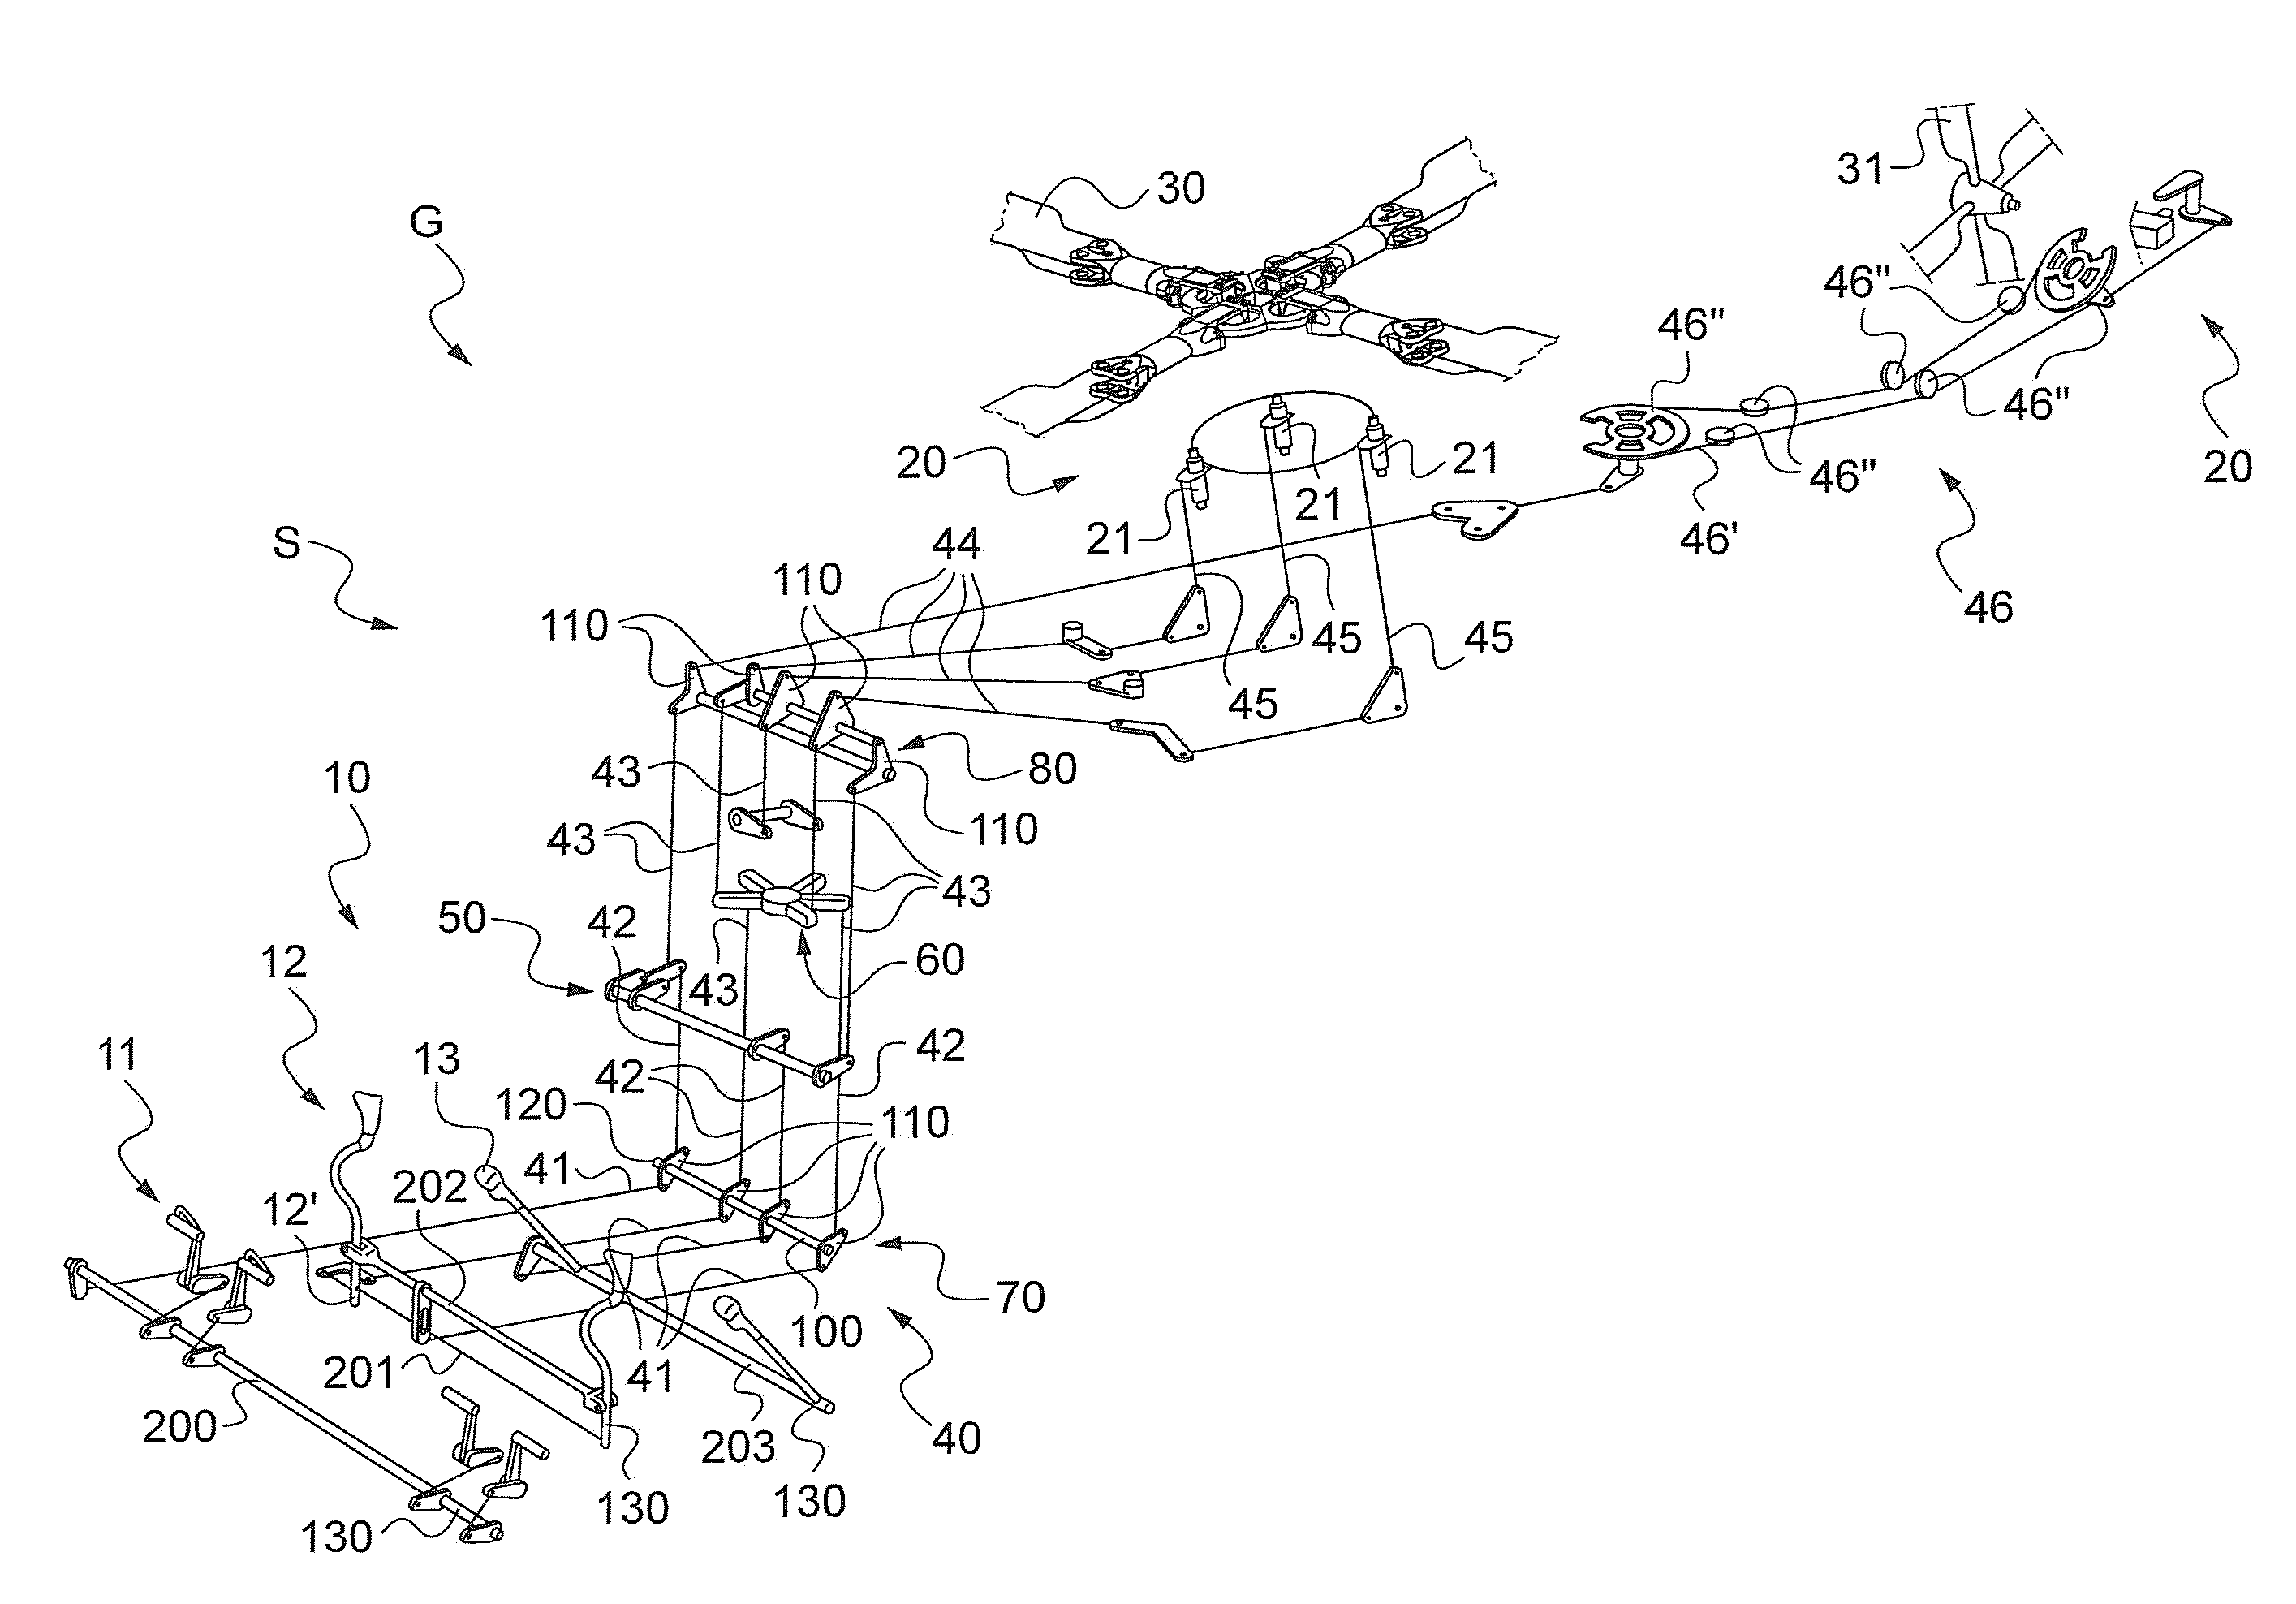 Power-assisted control system for a rotorcraft